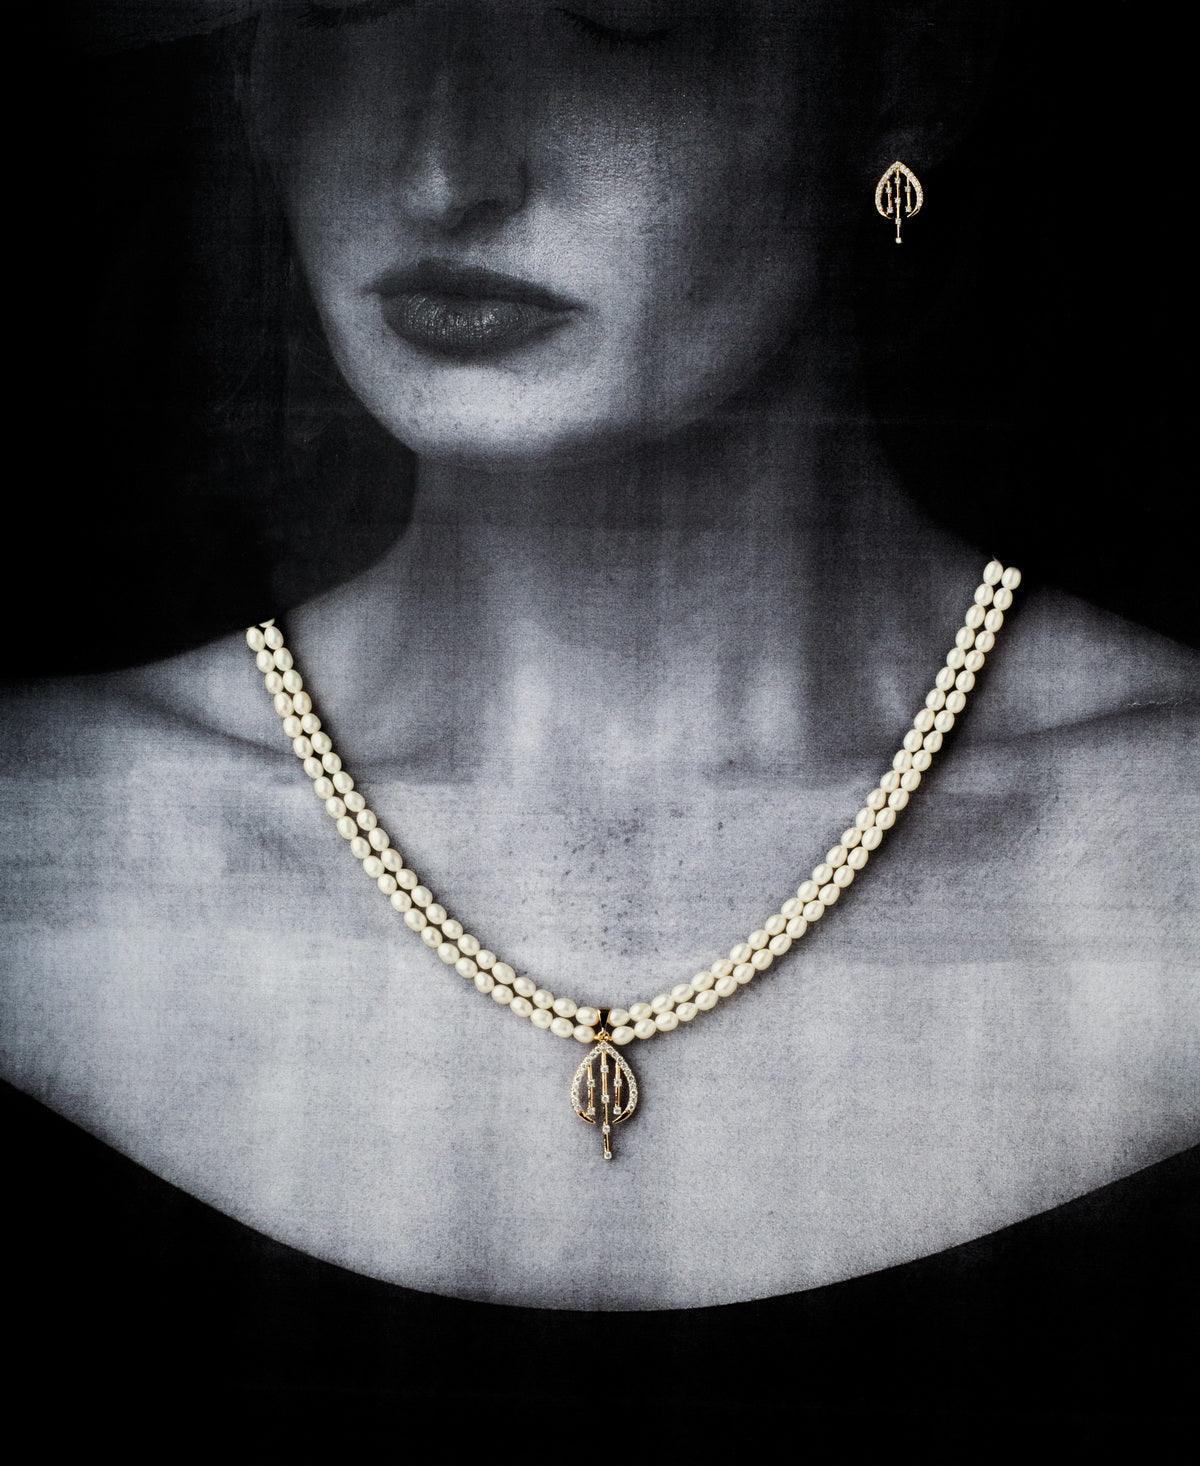 Vintage Real Pearl Necklace Set - Chandrani Pearls